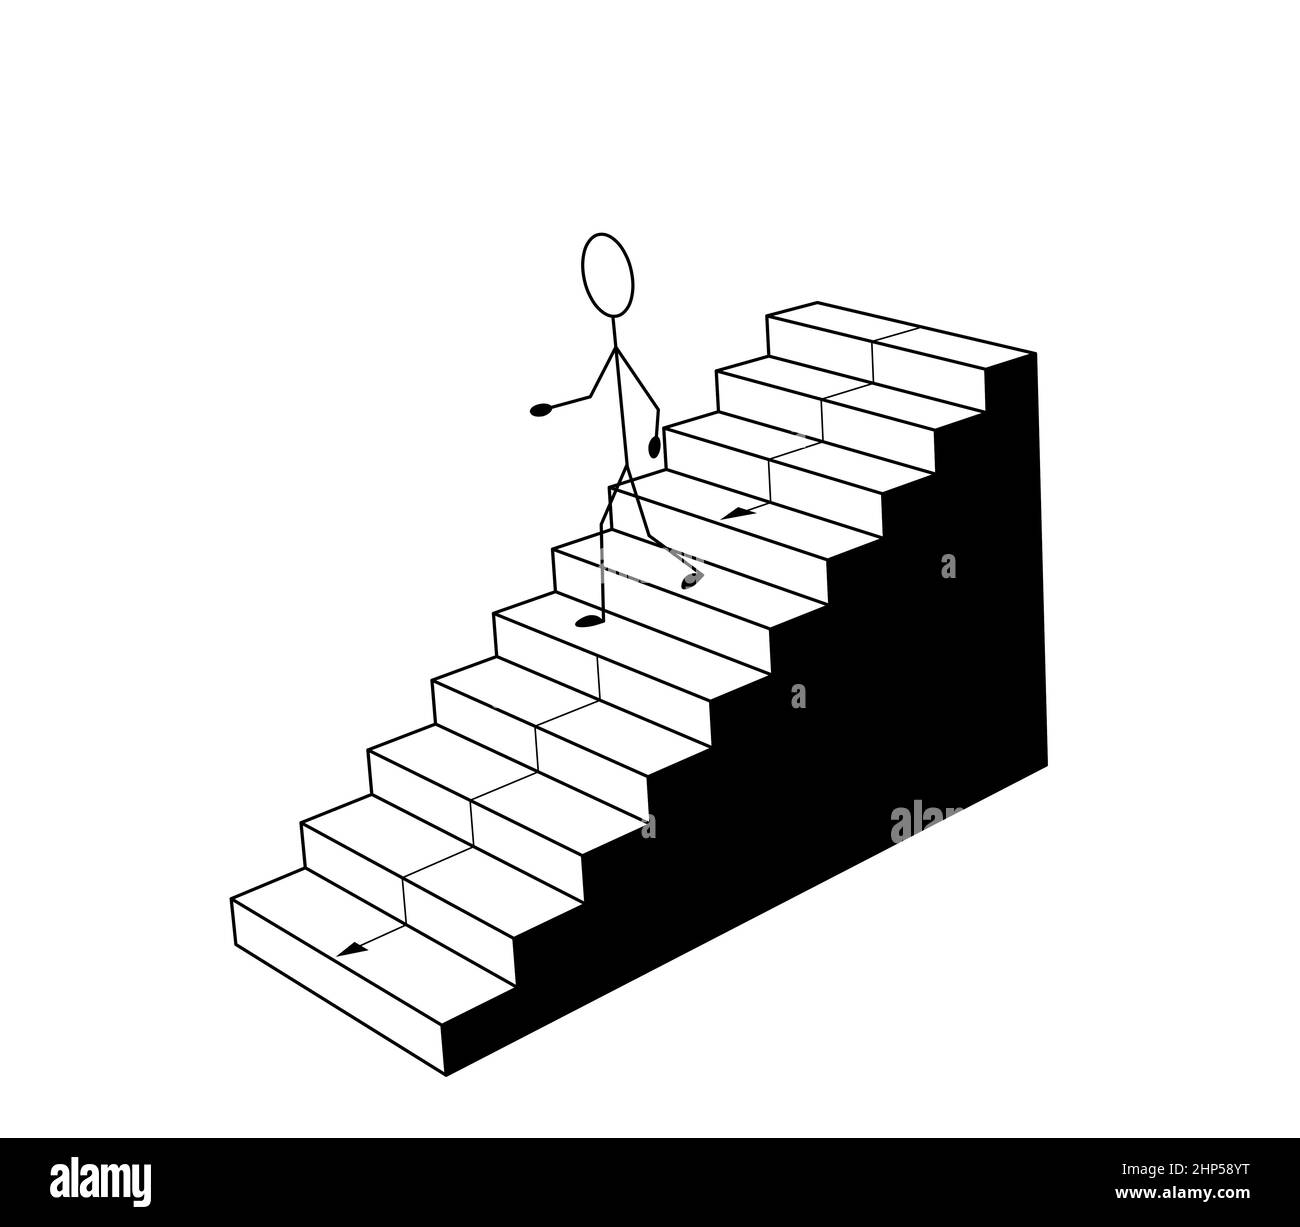 stick figure person walking down stairs. 3d black and white illustration Stock Photo